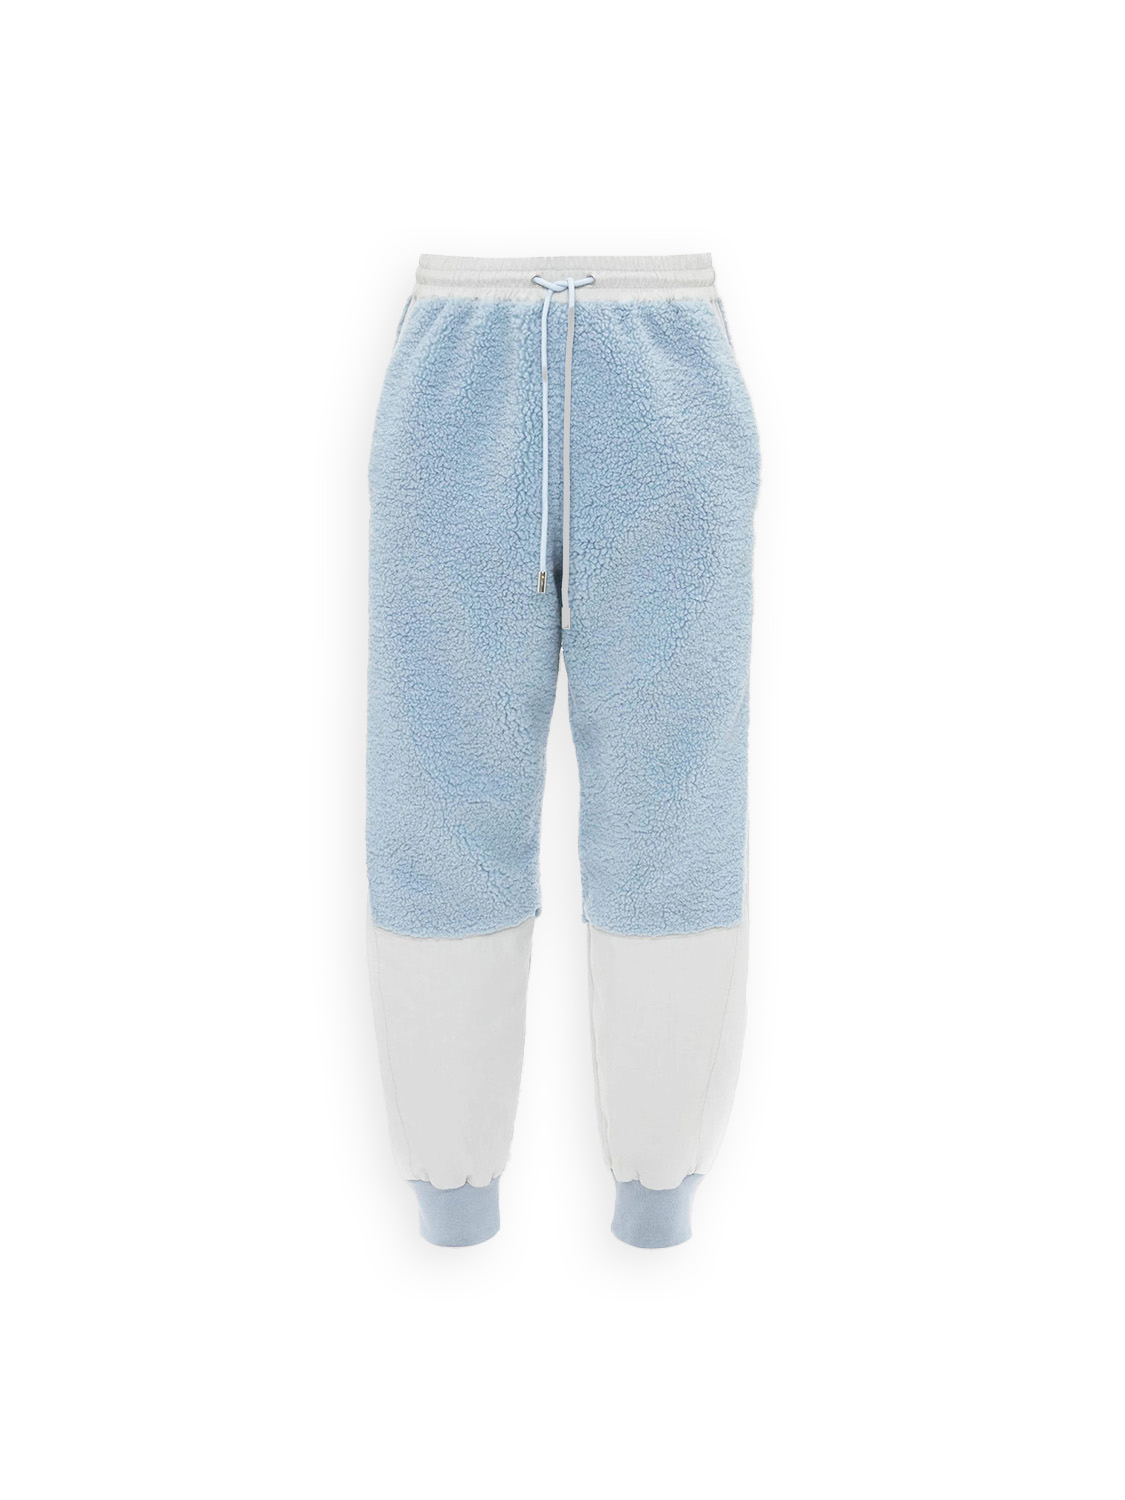 Colour Block - Teddy fur track pants with fabric details 